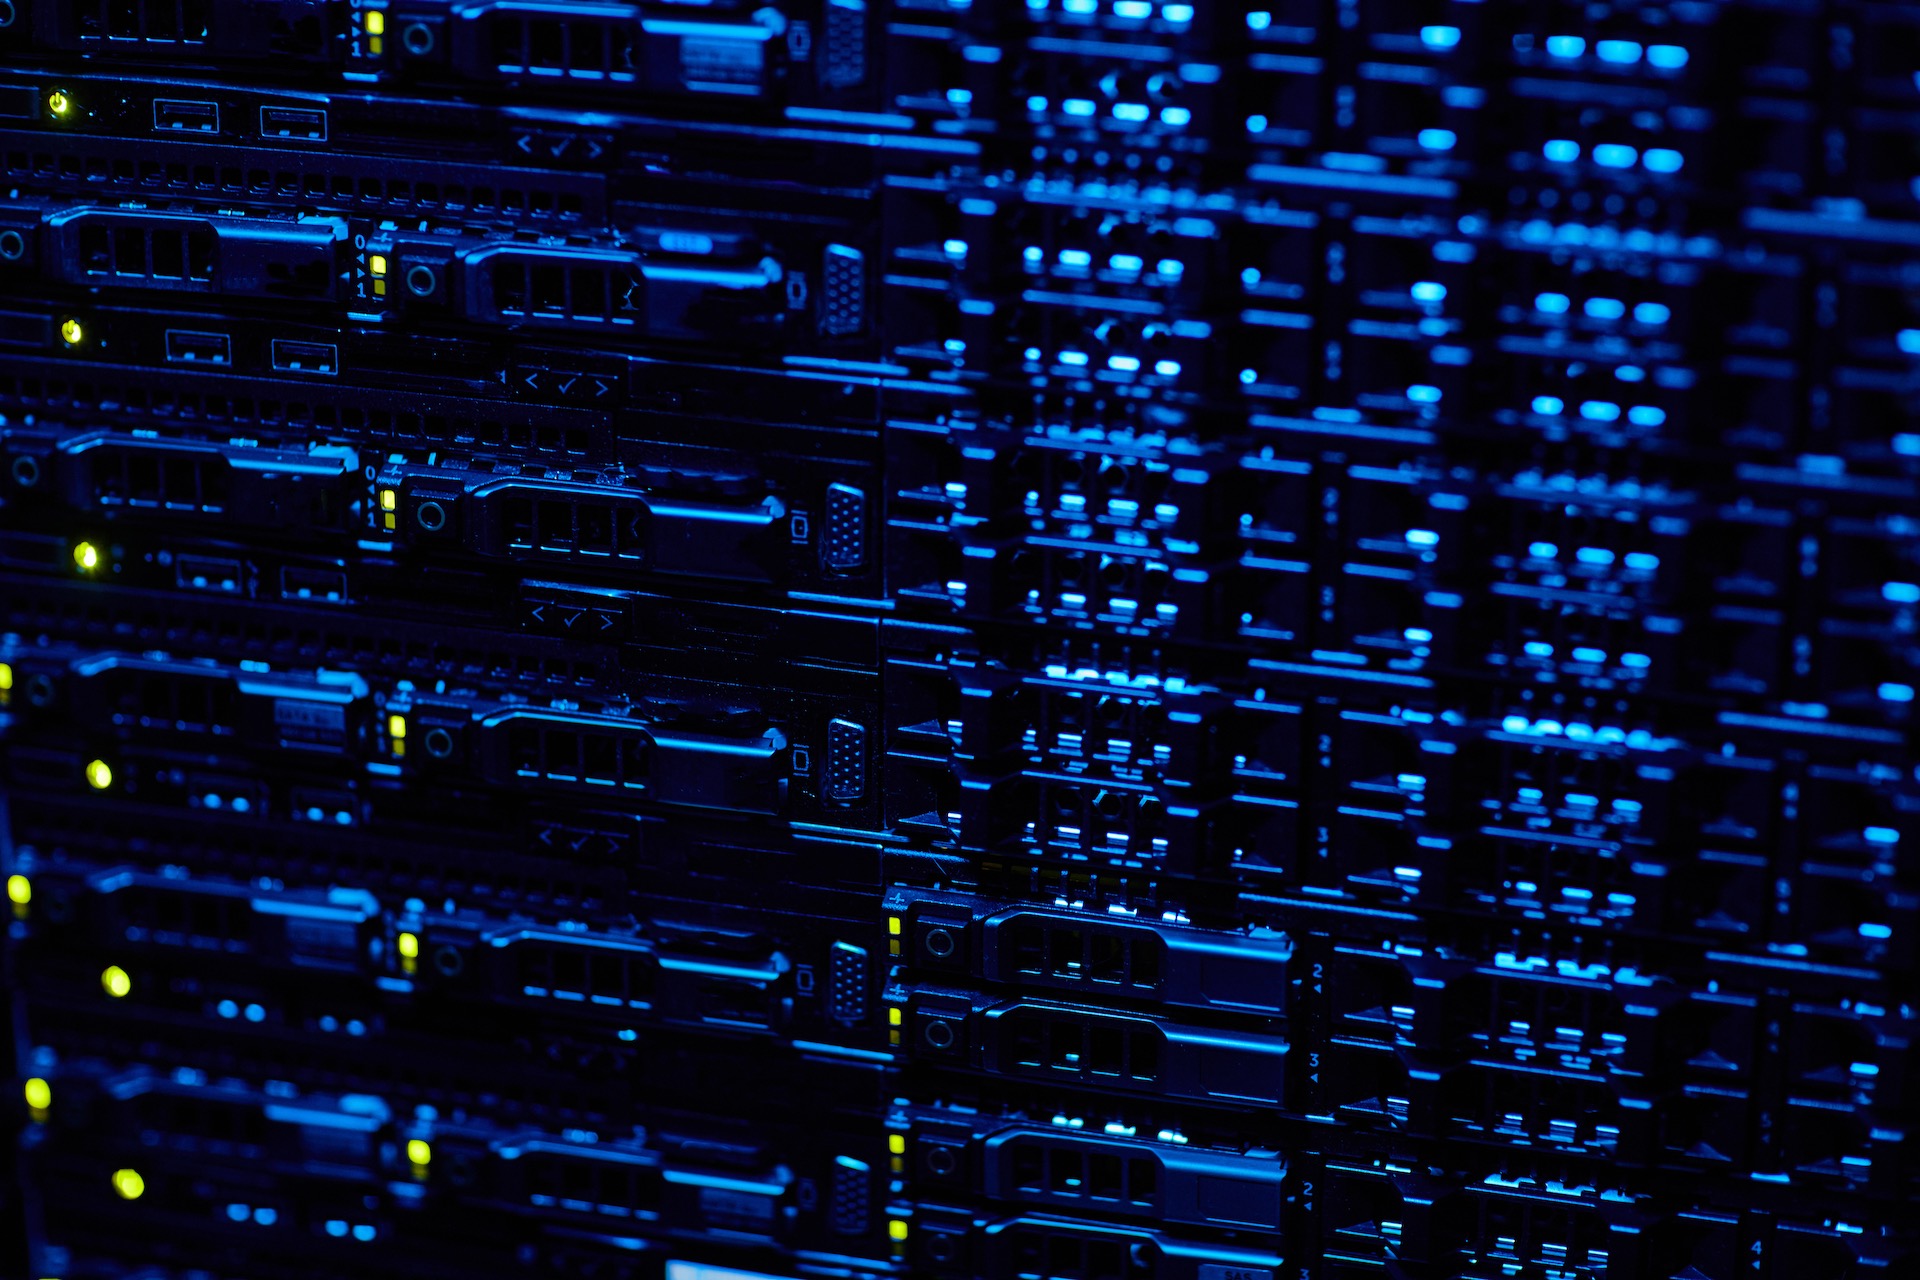 Background image of blade servers stacked in data center with blinking neon lights, copy space